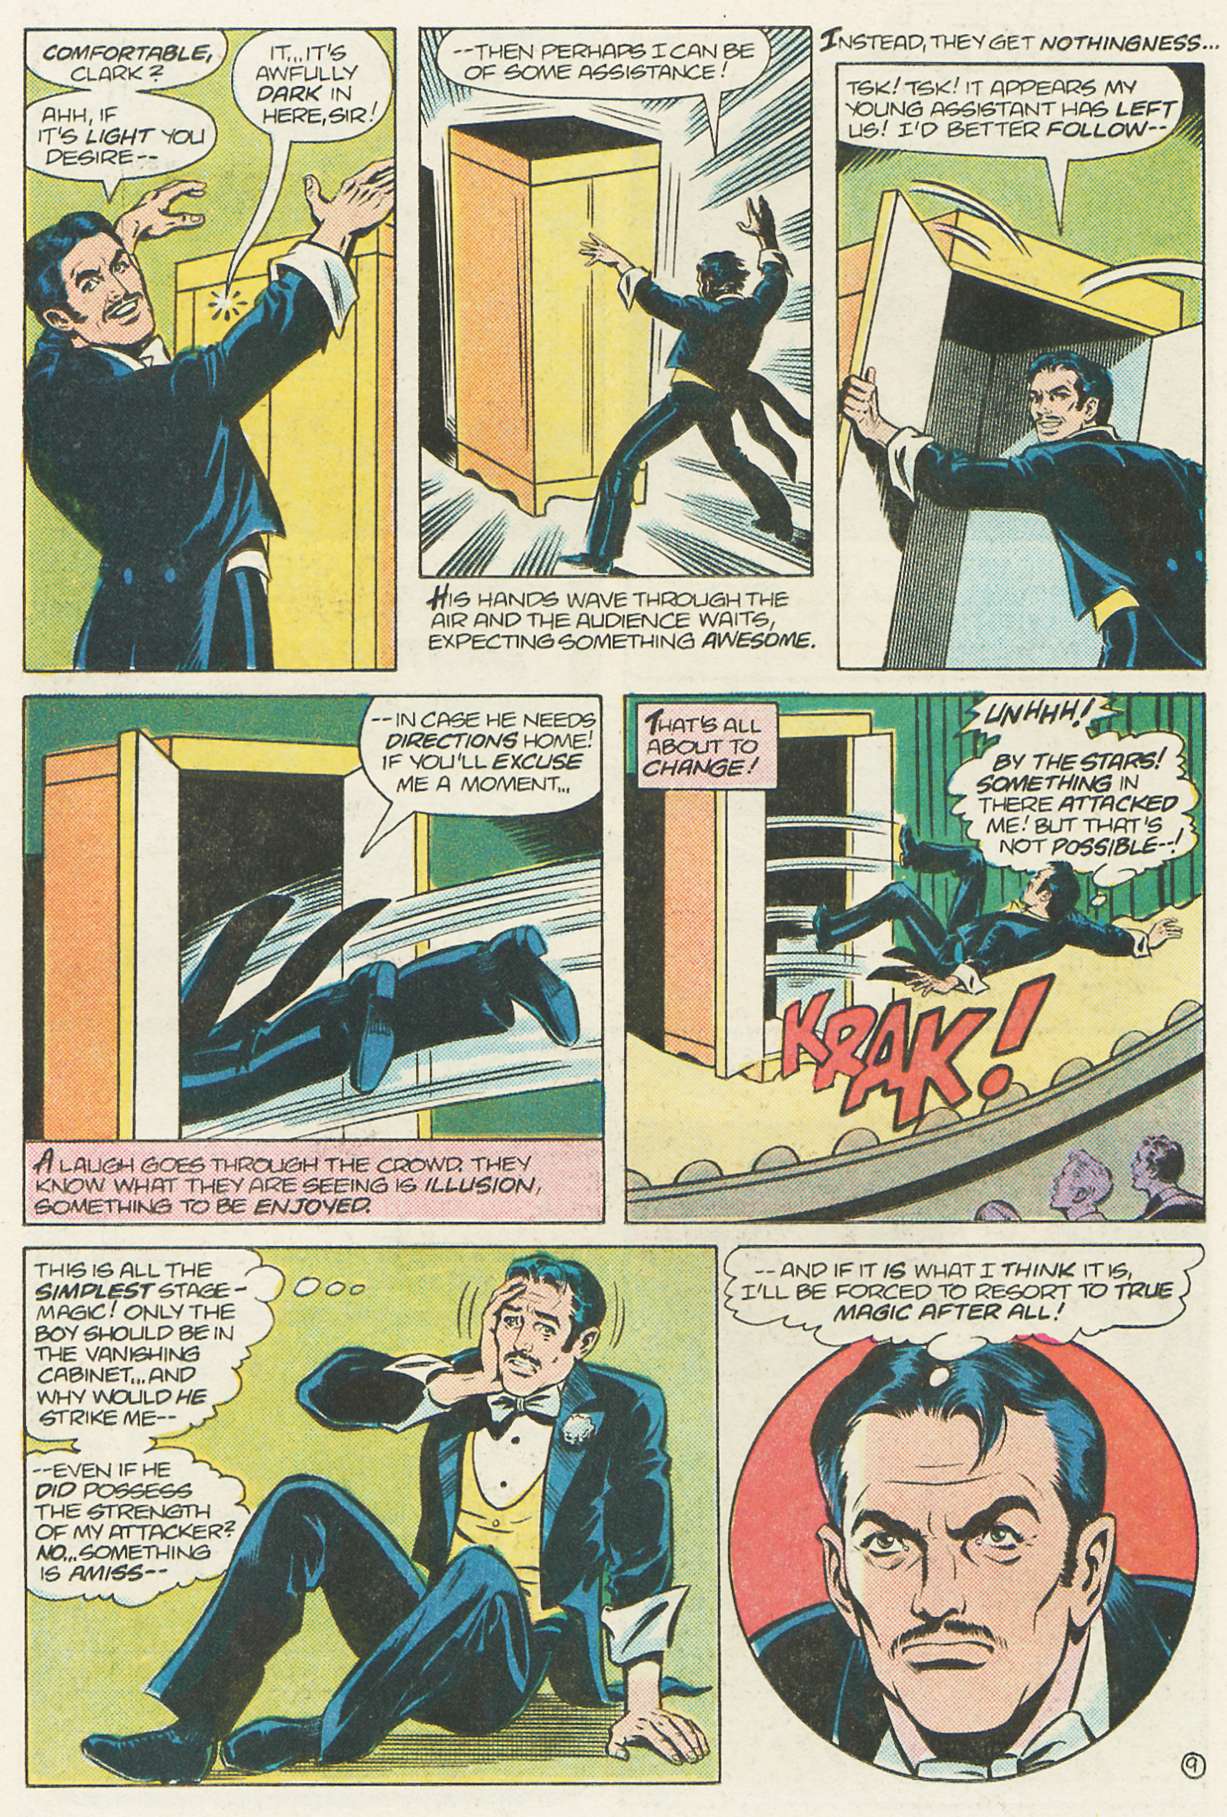 The New Adventures of Superboy 49 Page 9